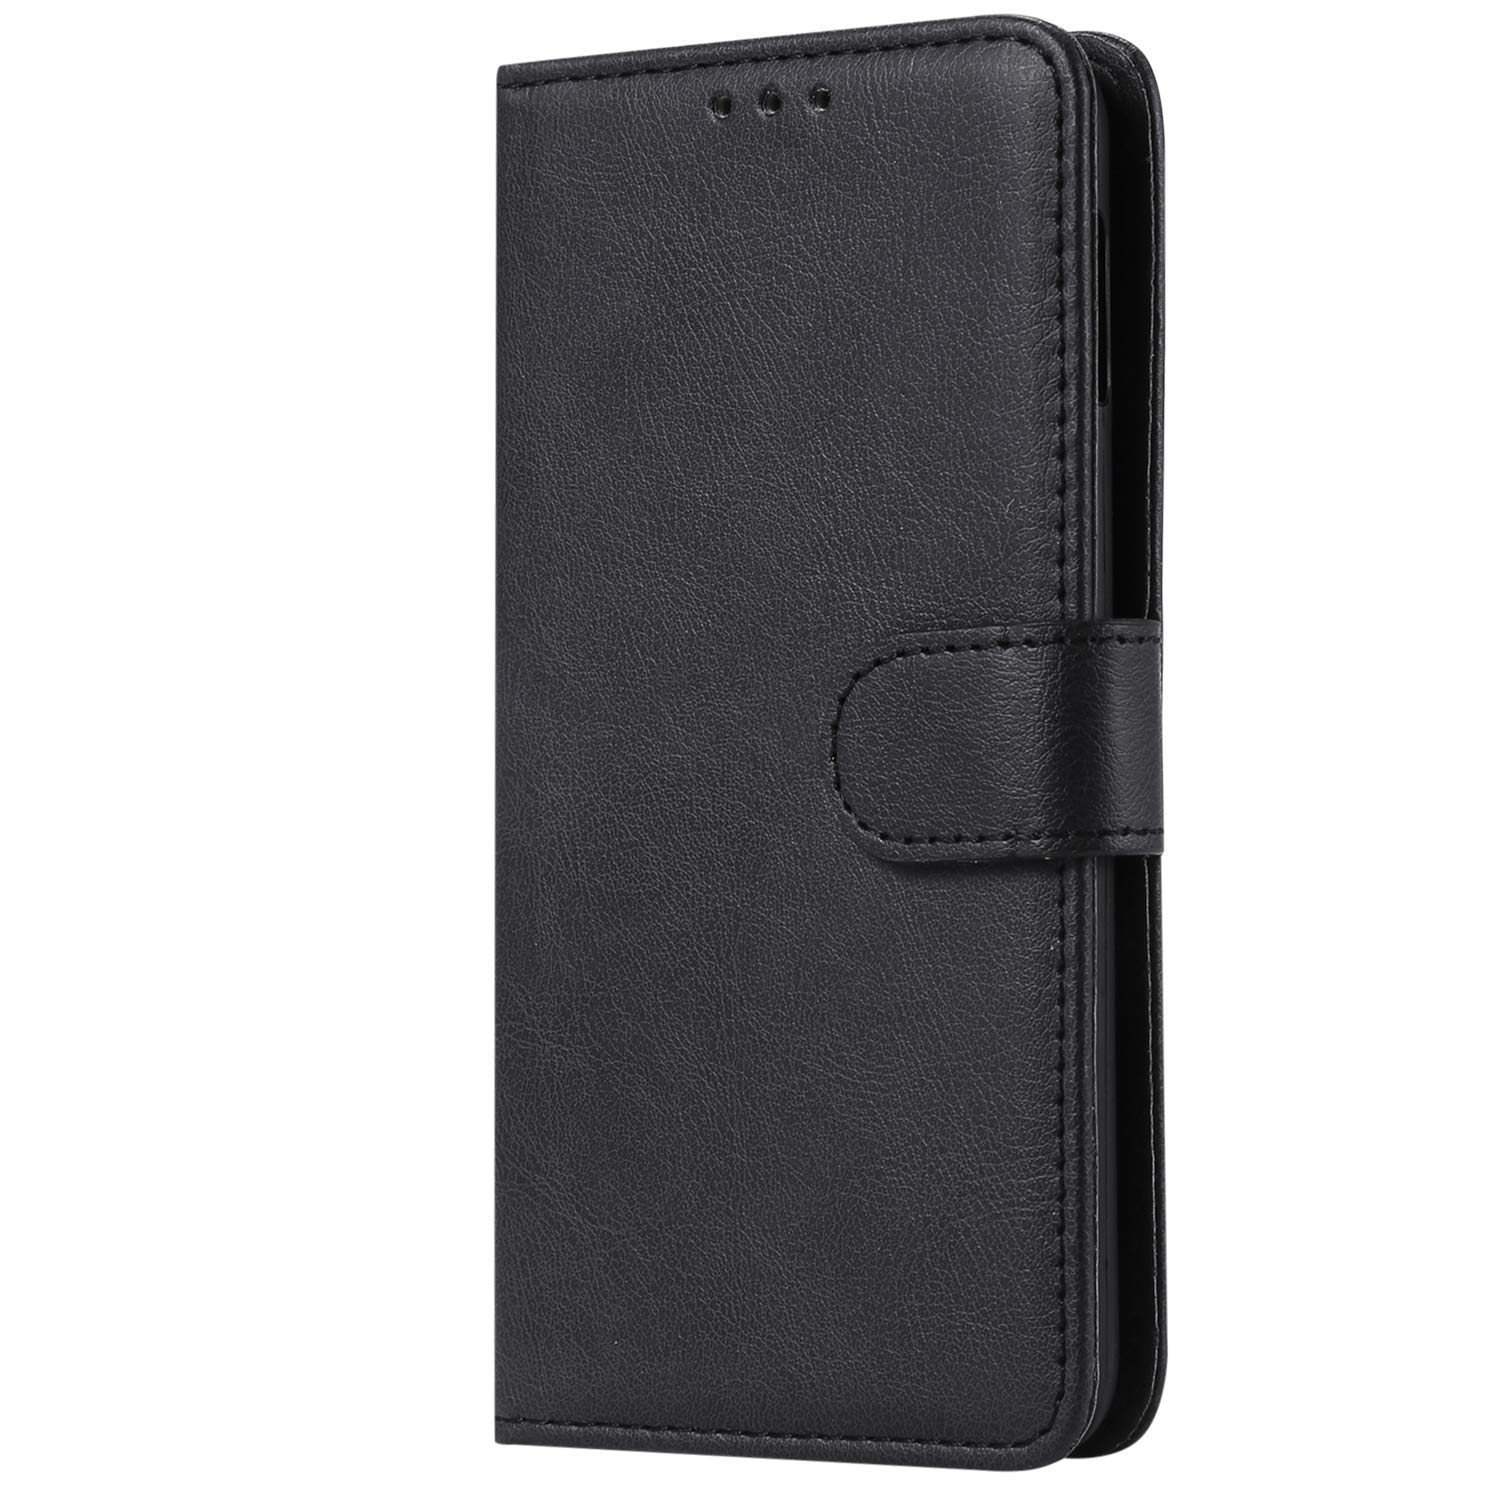 Black wallet case for Samsung Galaxy S10 Plus cell phones